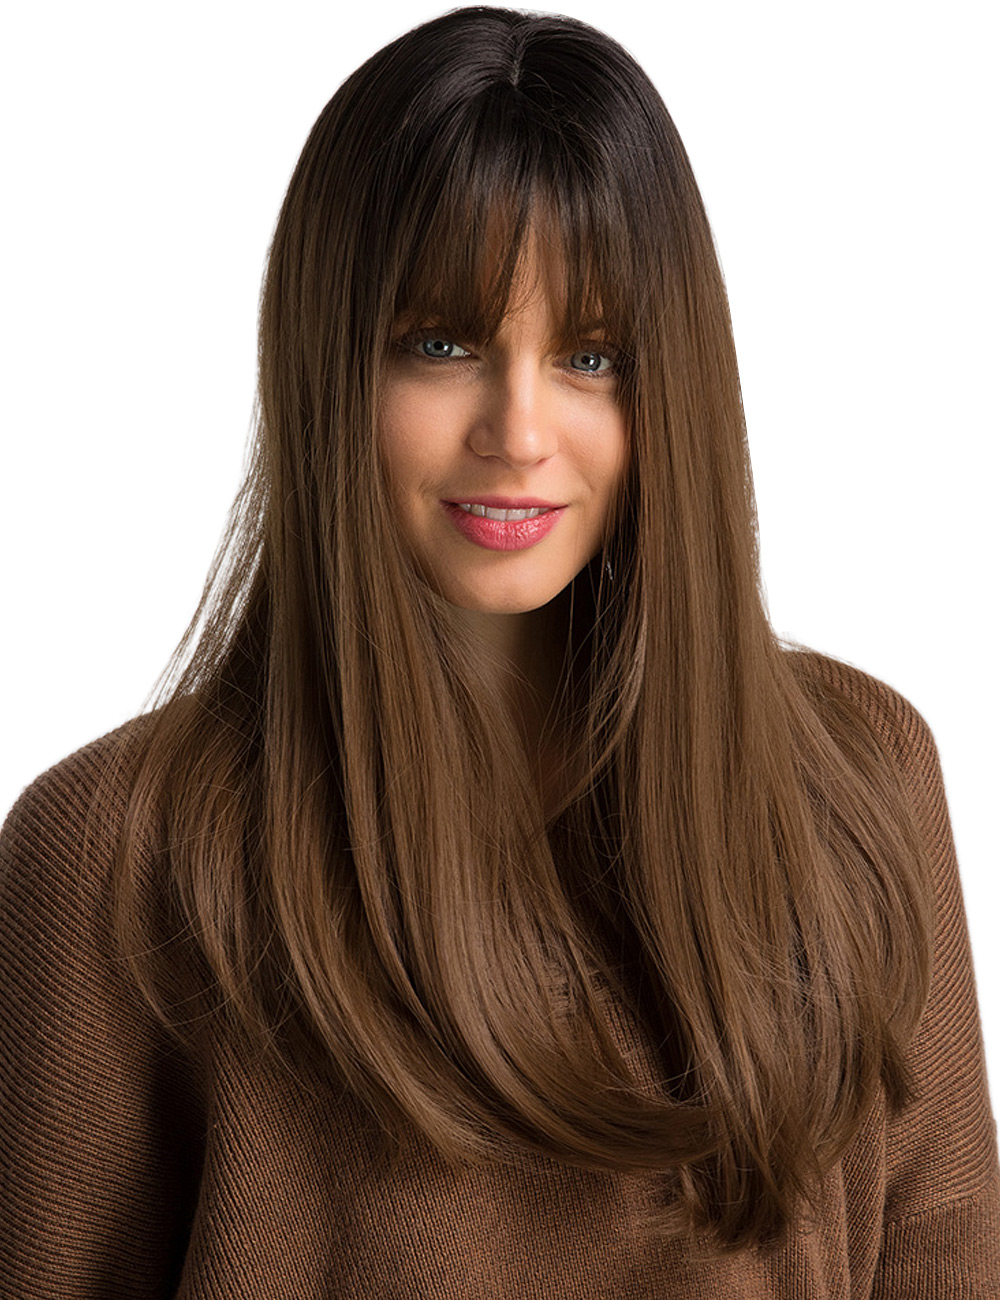 Long Straight Synthetic Hair With Bangs Women Wig 	20 Inches